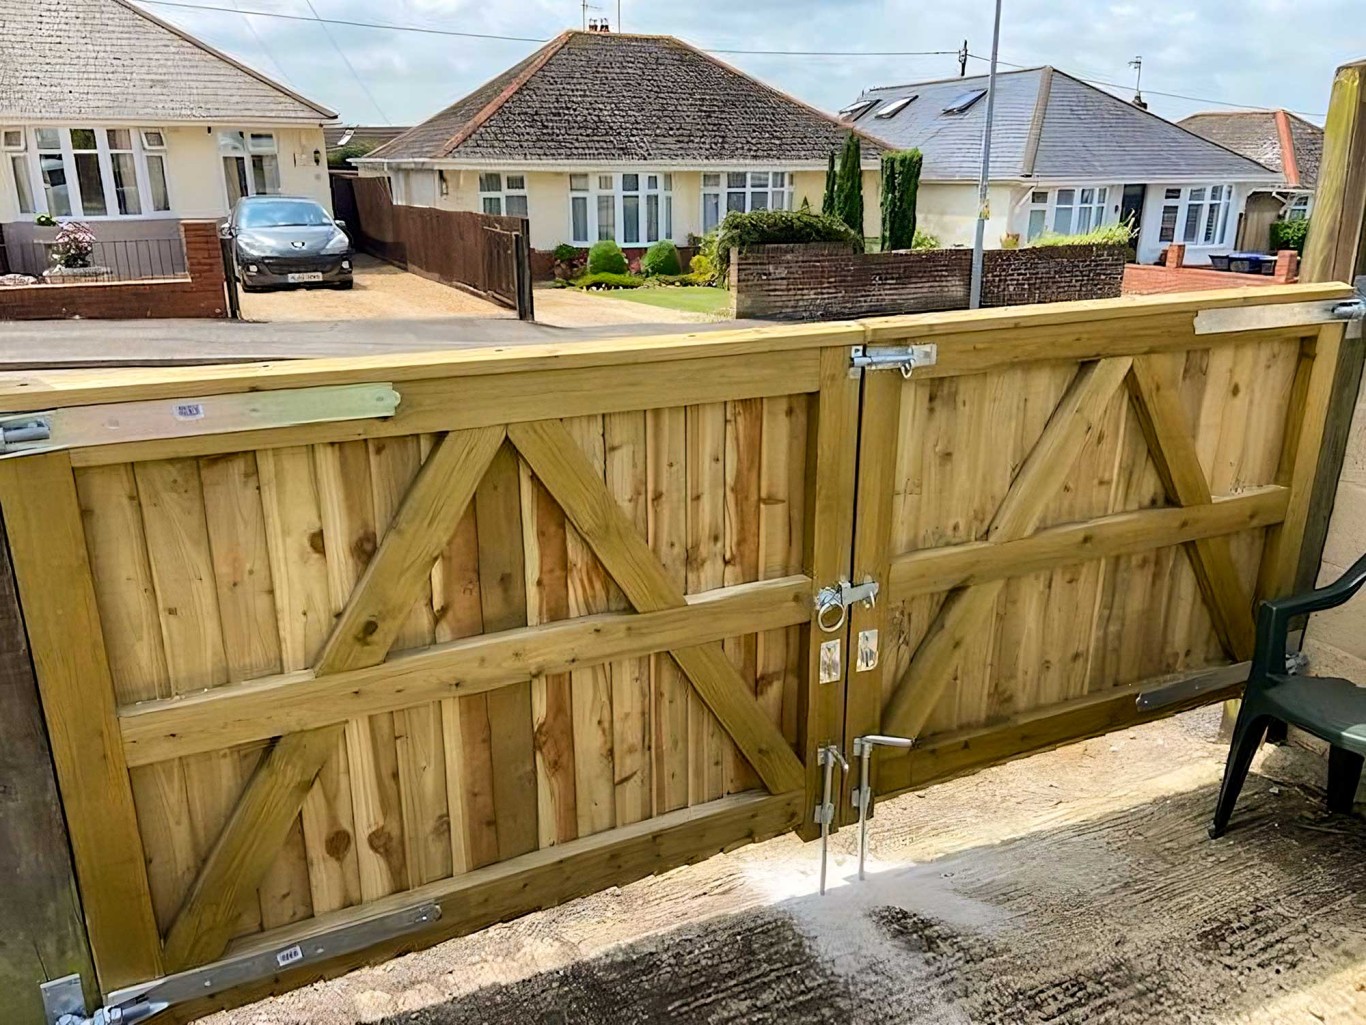 Large double gate with various fixtures and fittings.